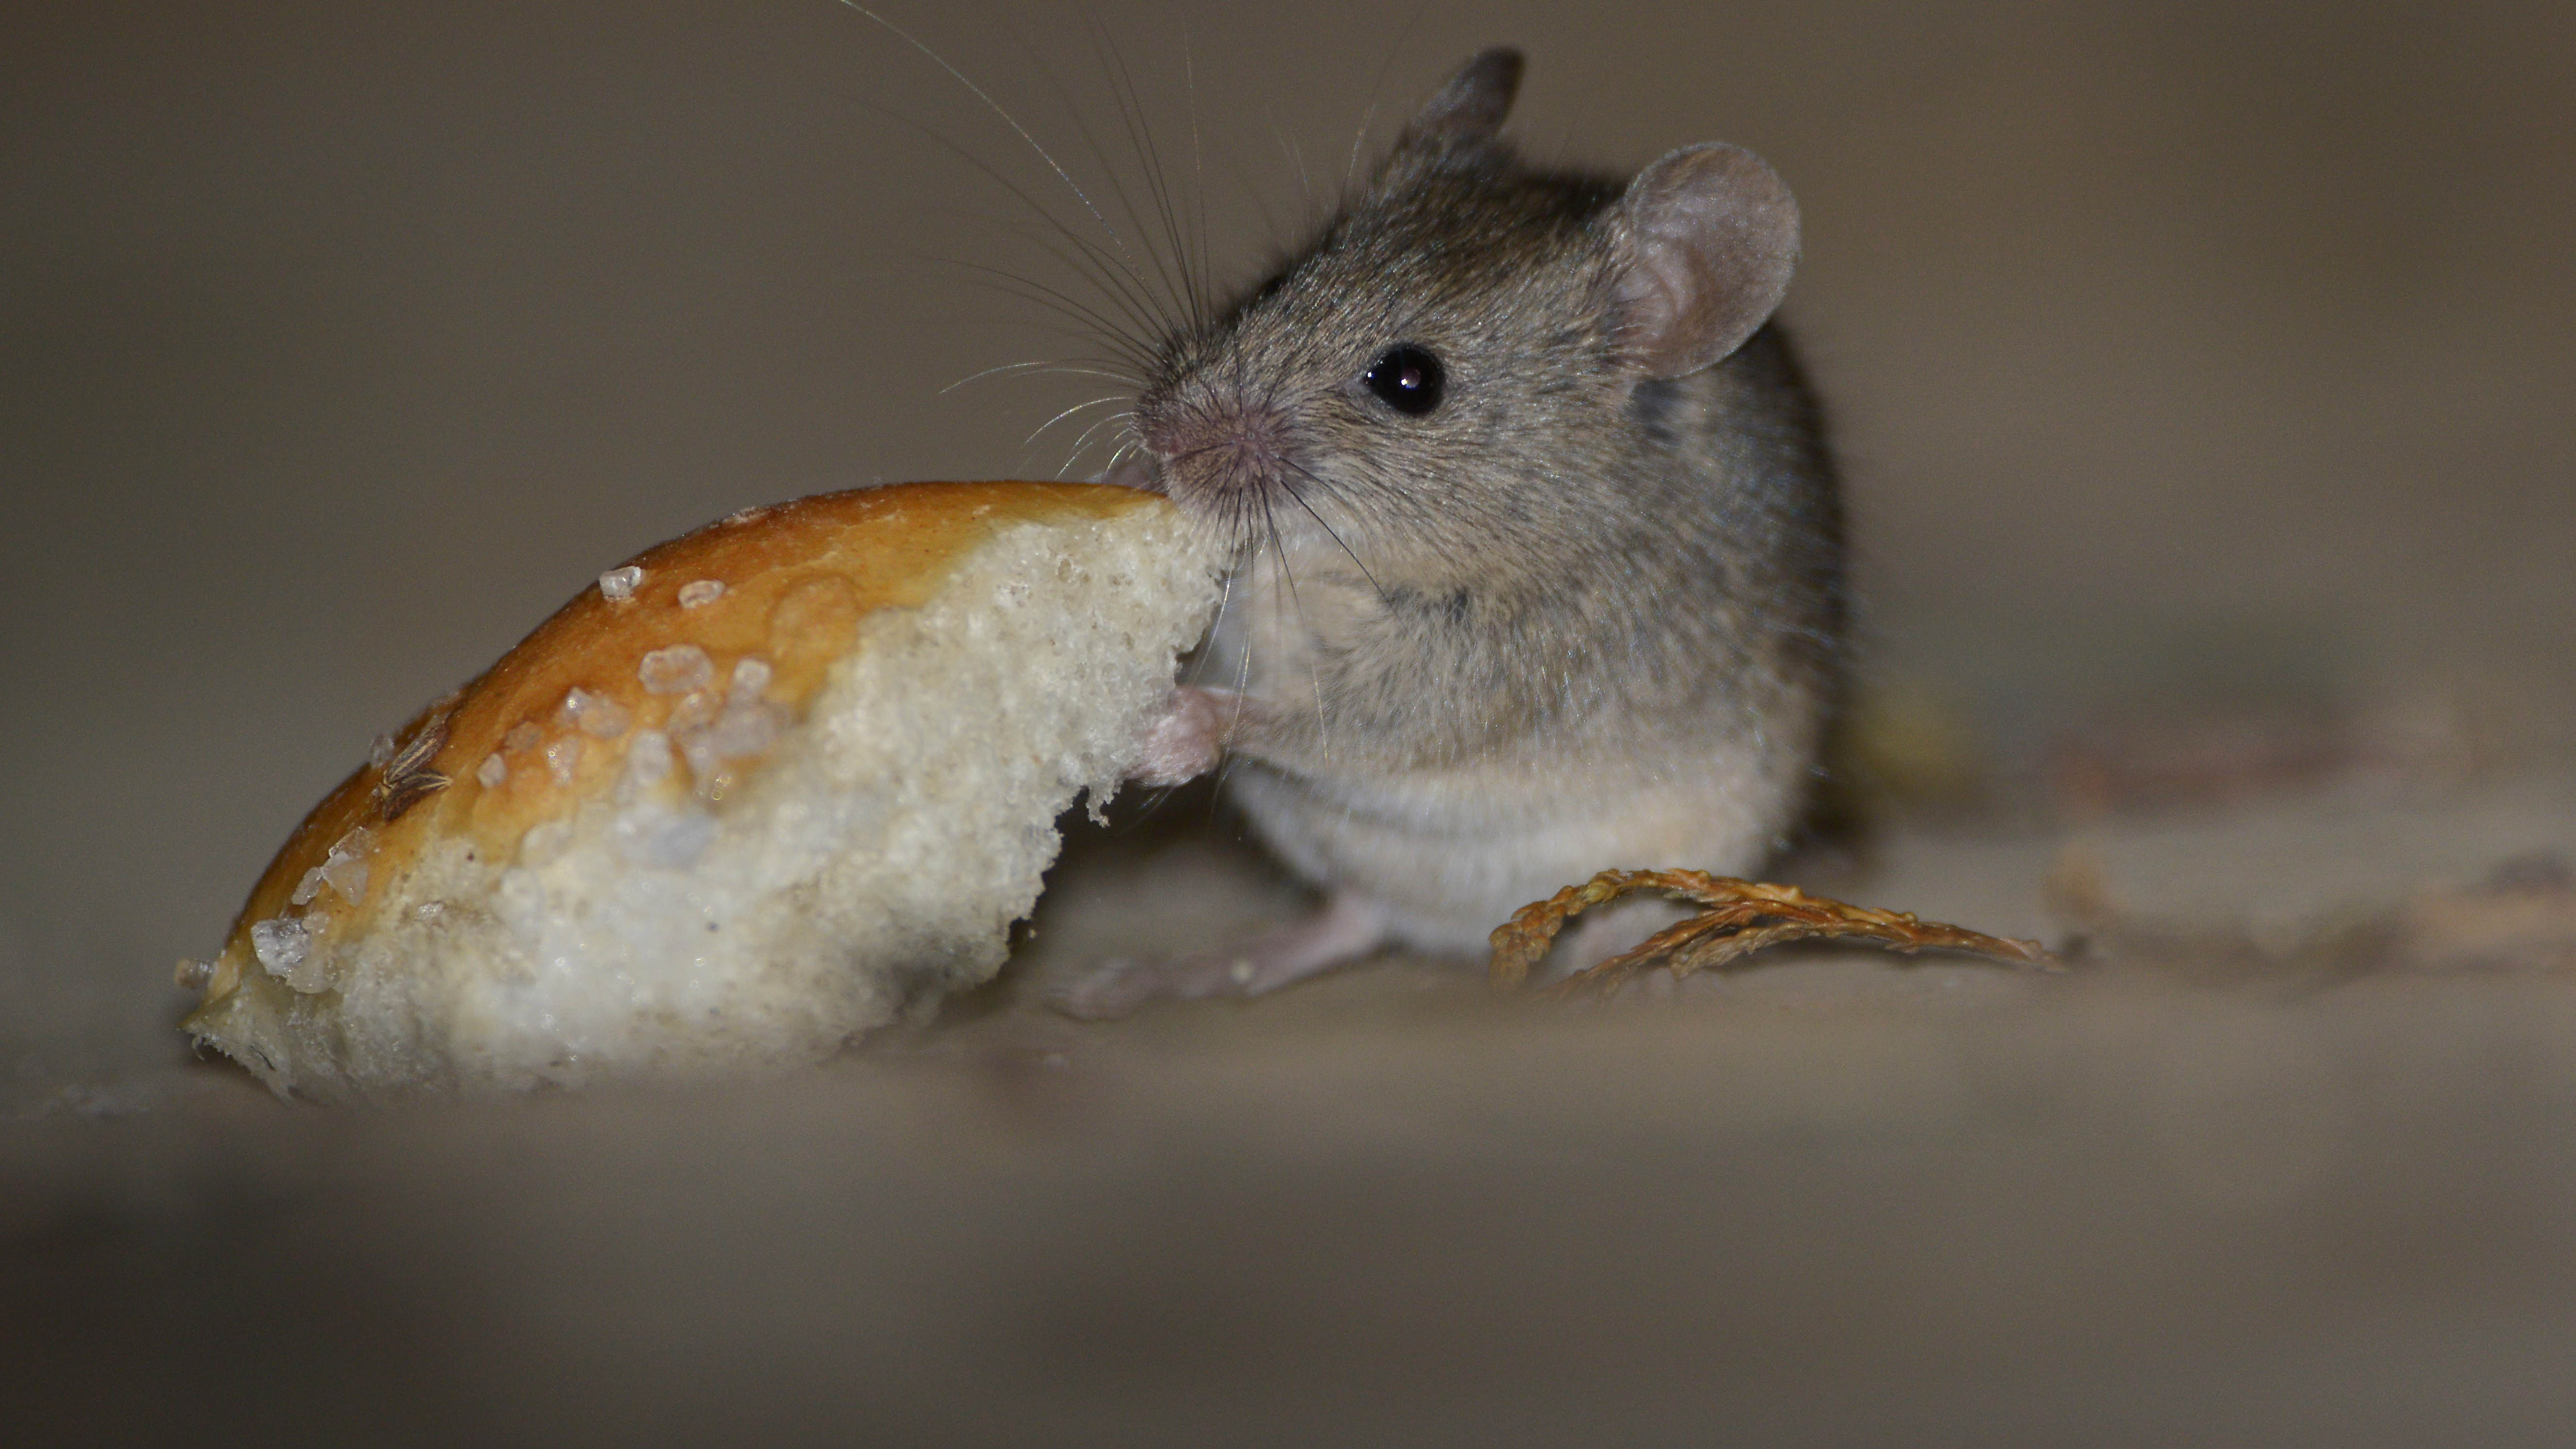 Mouse eating leftover food